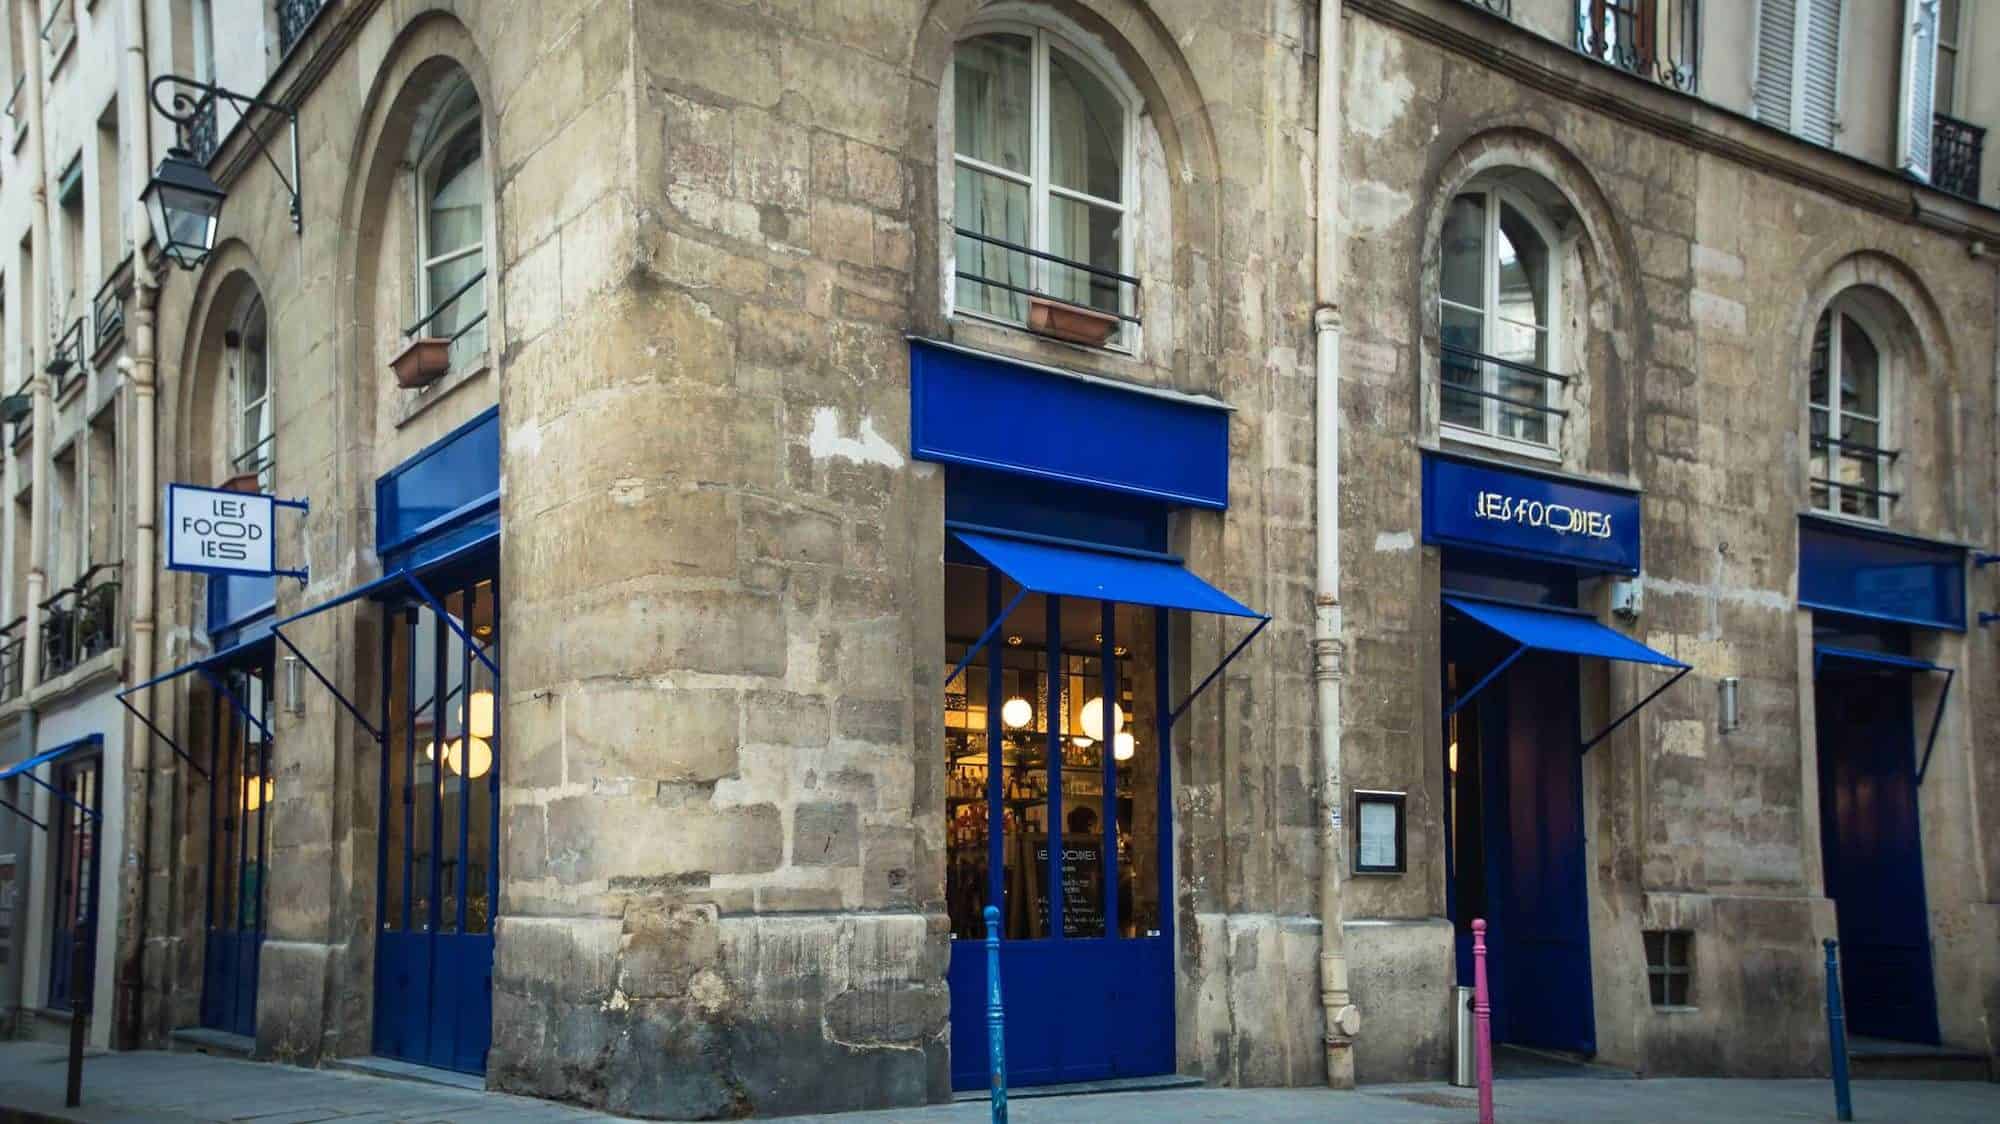 Les Foodies, which has just opened, is a contemporary restaurant in Paris.